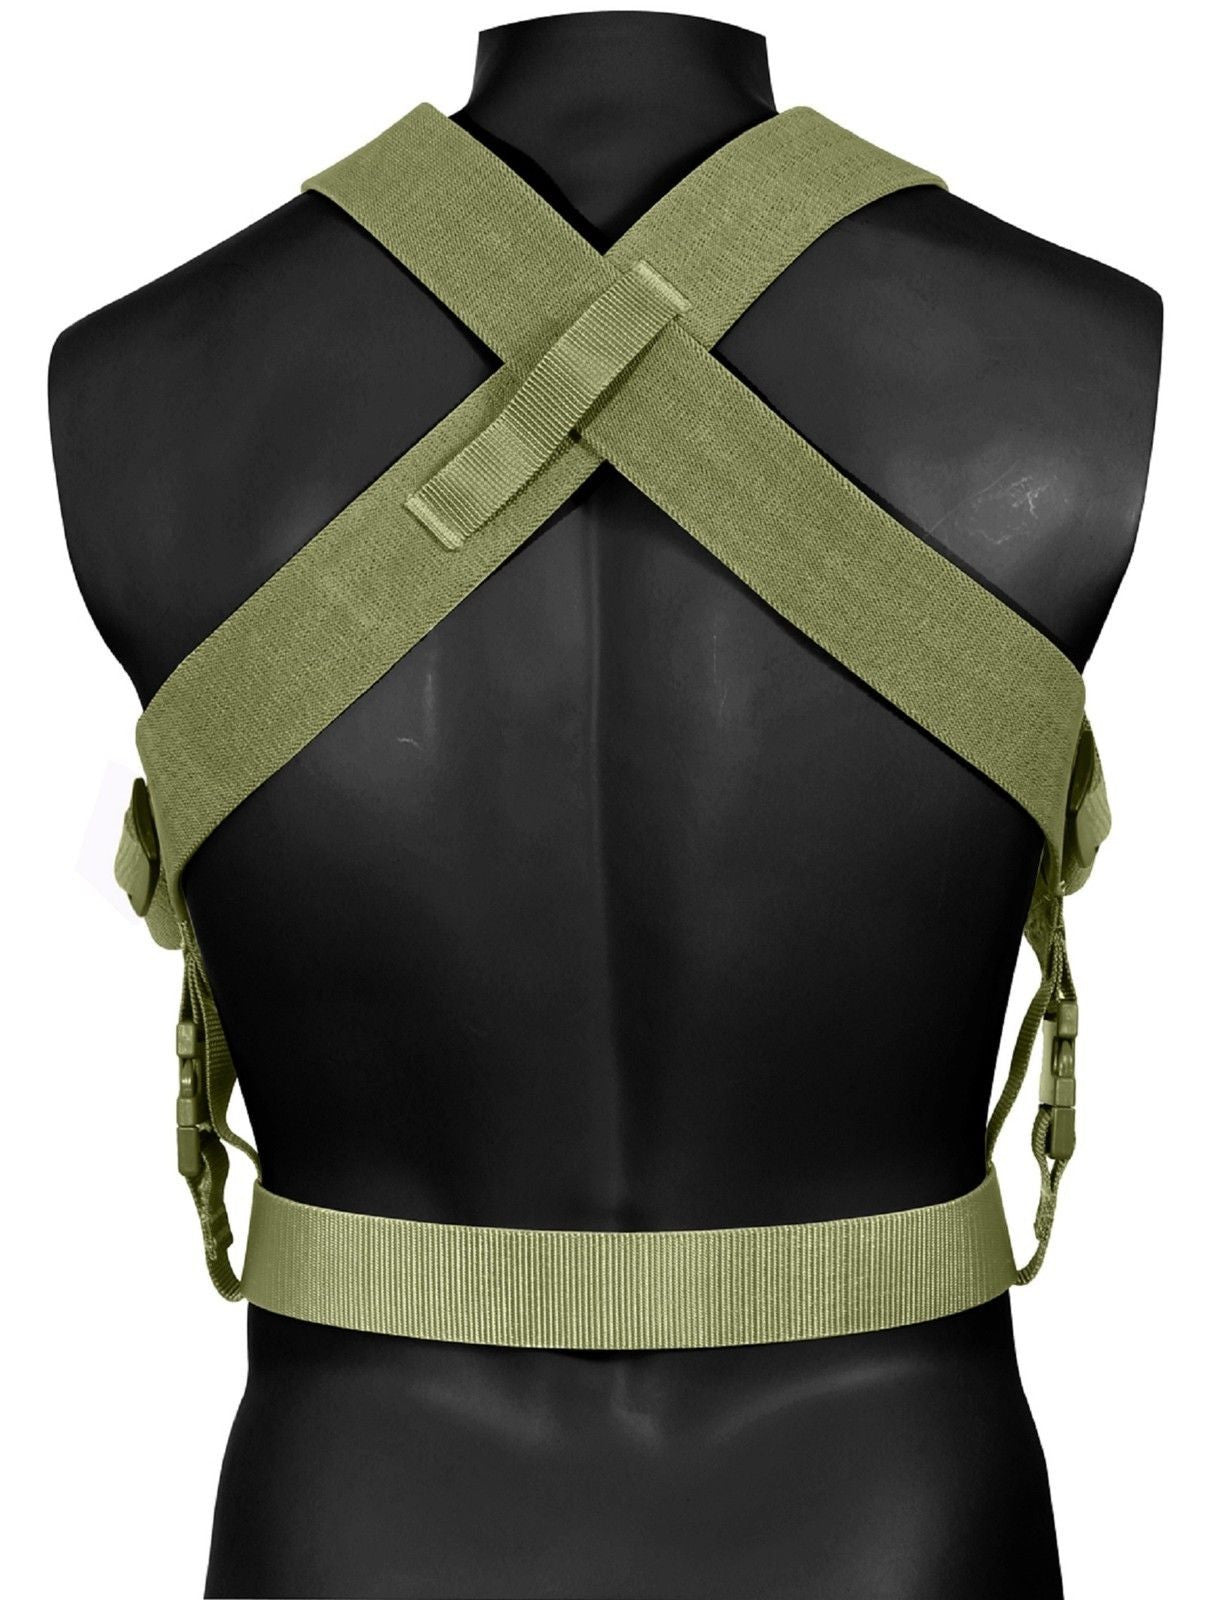 Olive Drab Tactical Combat Suspenders - Rothco Adjustable Gear Support Suspender